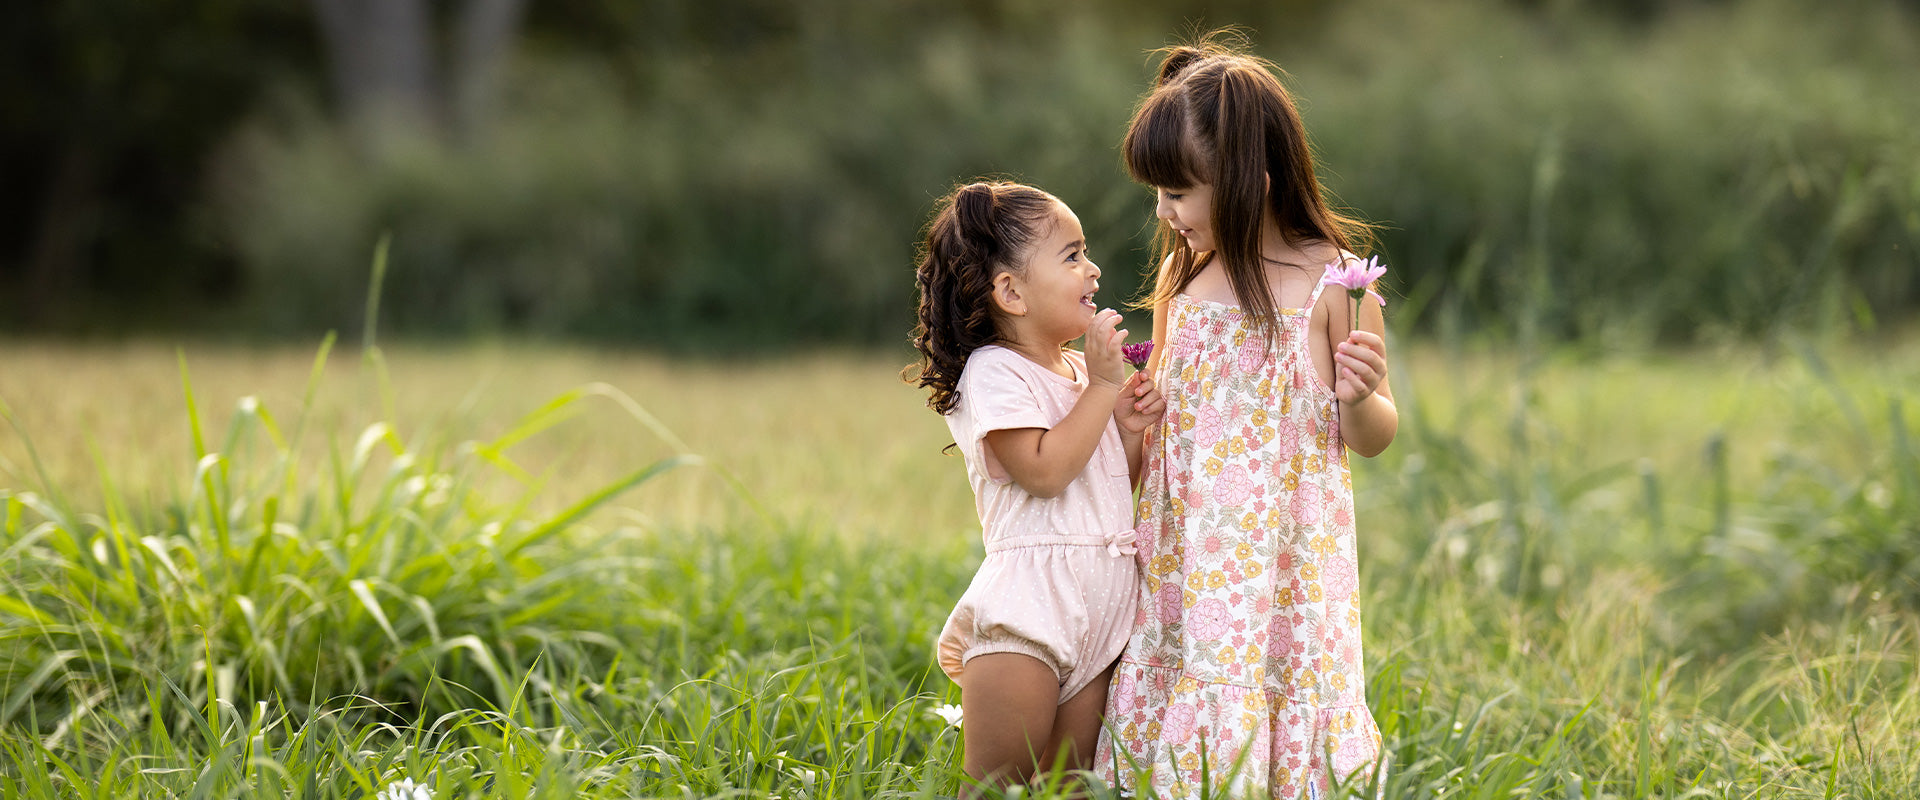 Two little girls wearing pink floral outfits are standing in a field together.